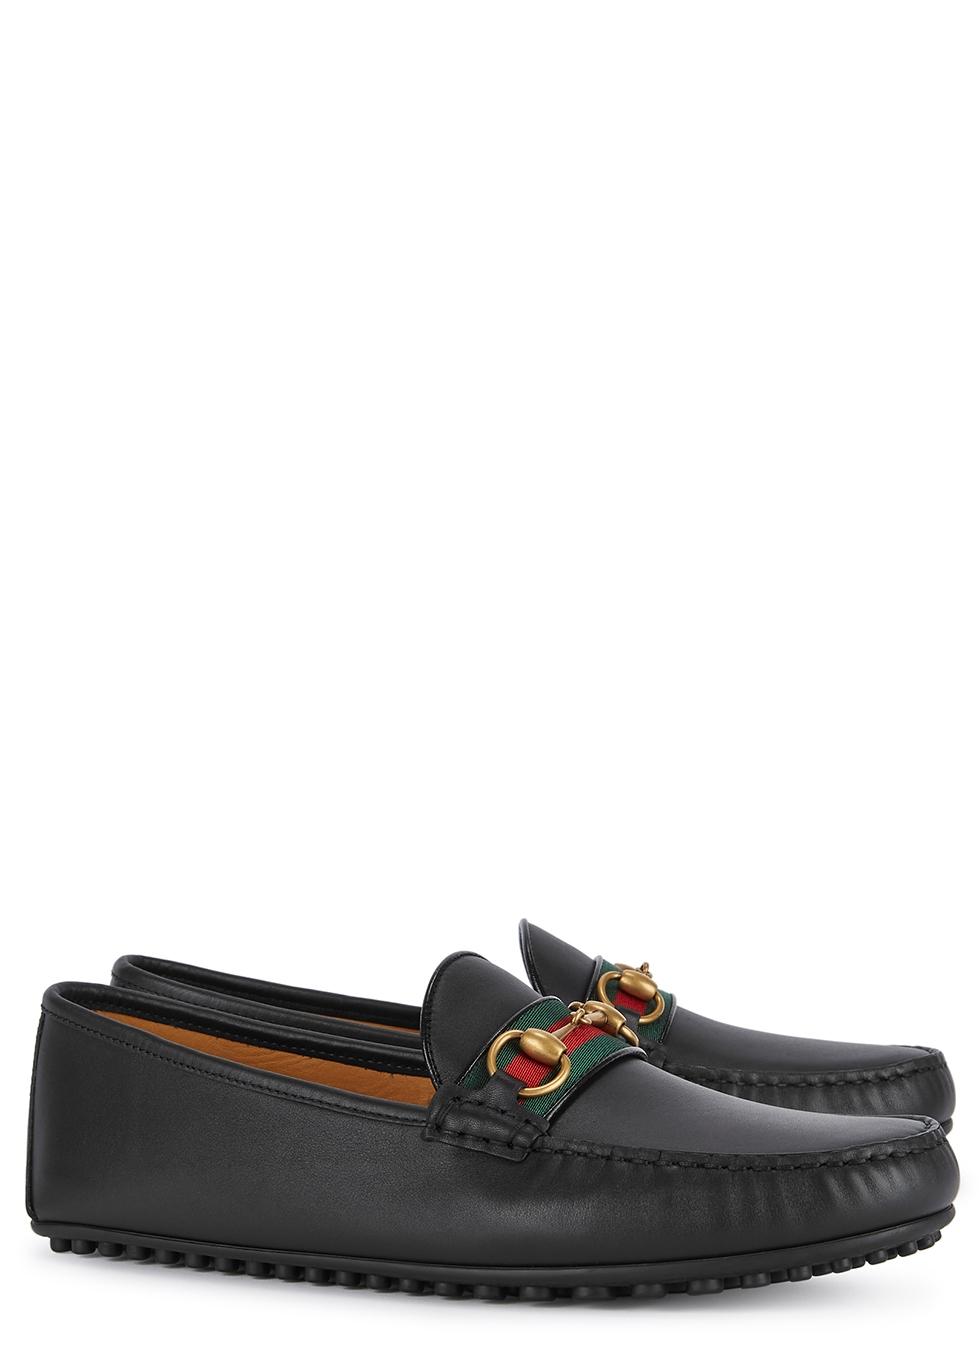 gucci new kanye leather driving shoes 